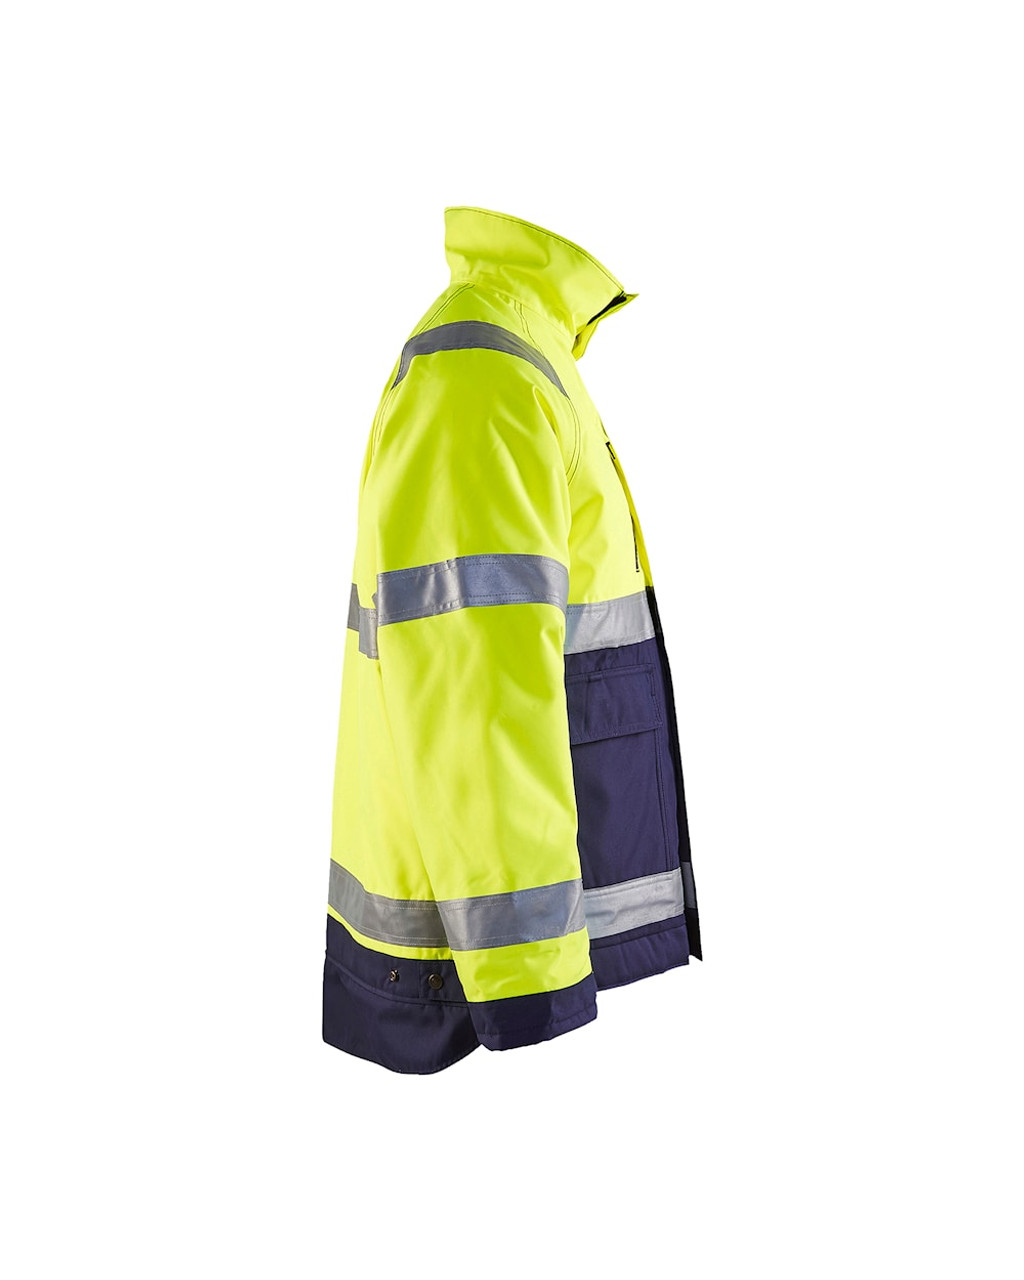 BLAKLADER Jacket  4827  with  for BLAKLADER Jacket  | 4827 High Vis Yellow / Navy Blue  Full Zip Winter Windproof Jacket in Reflective Tape Polyester Waterproof that have Full Zip  available in Australia and New Zealand